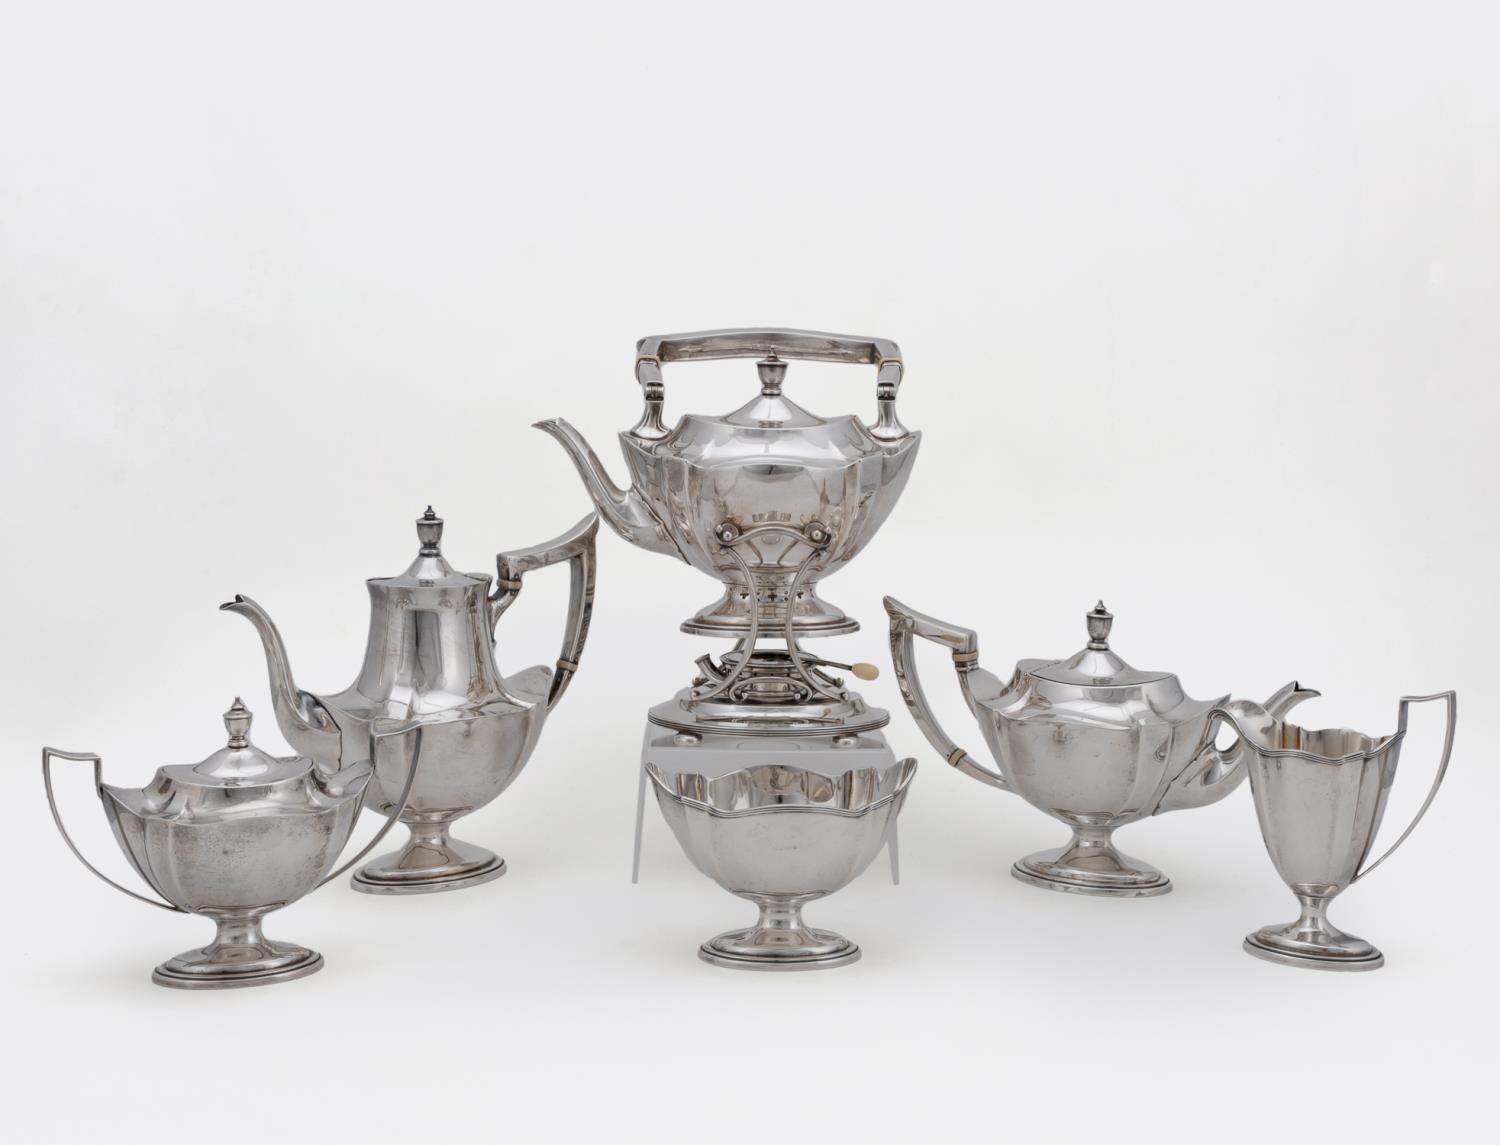 GORHAM PLYMOUTH STERLING SILVER TEA